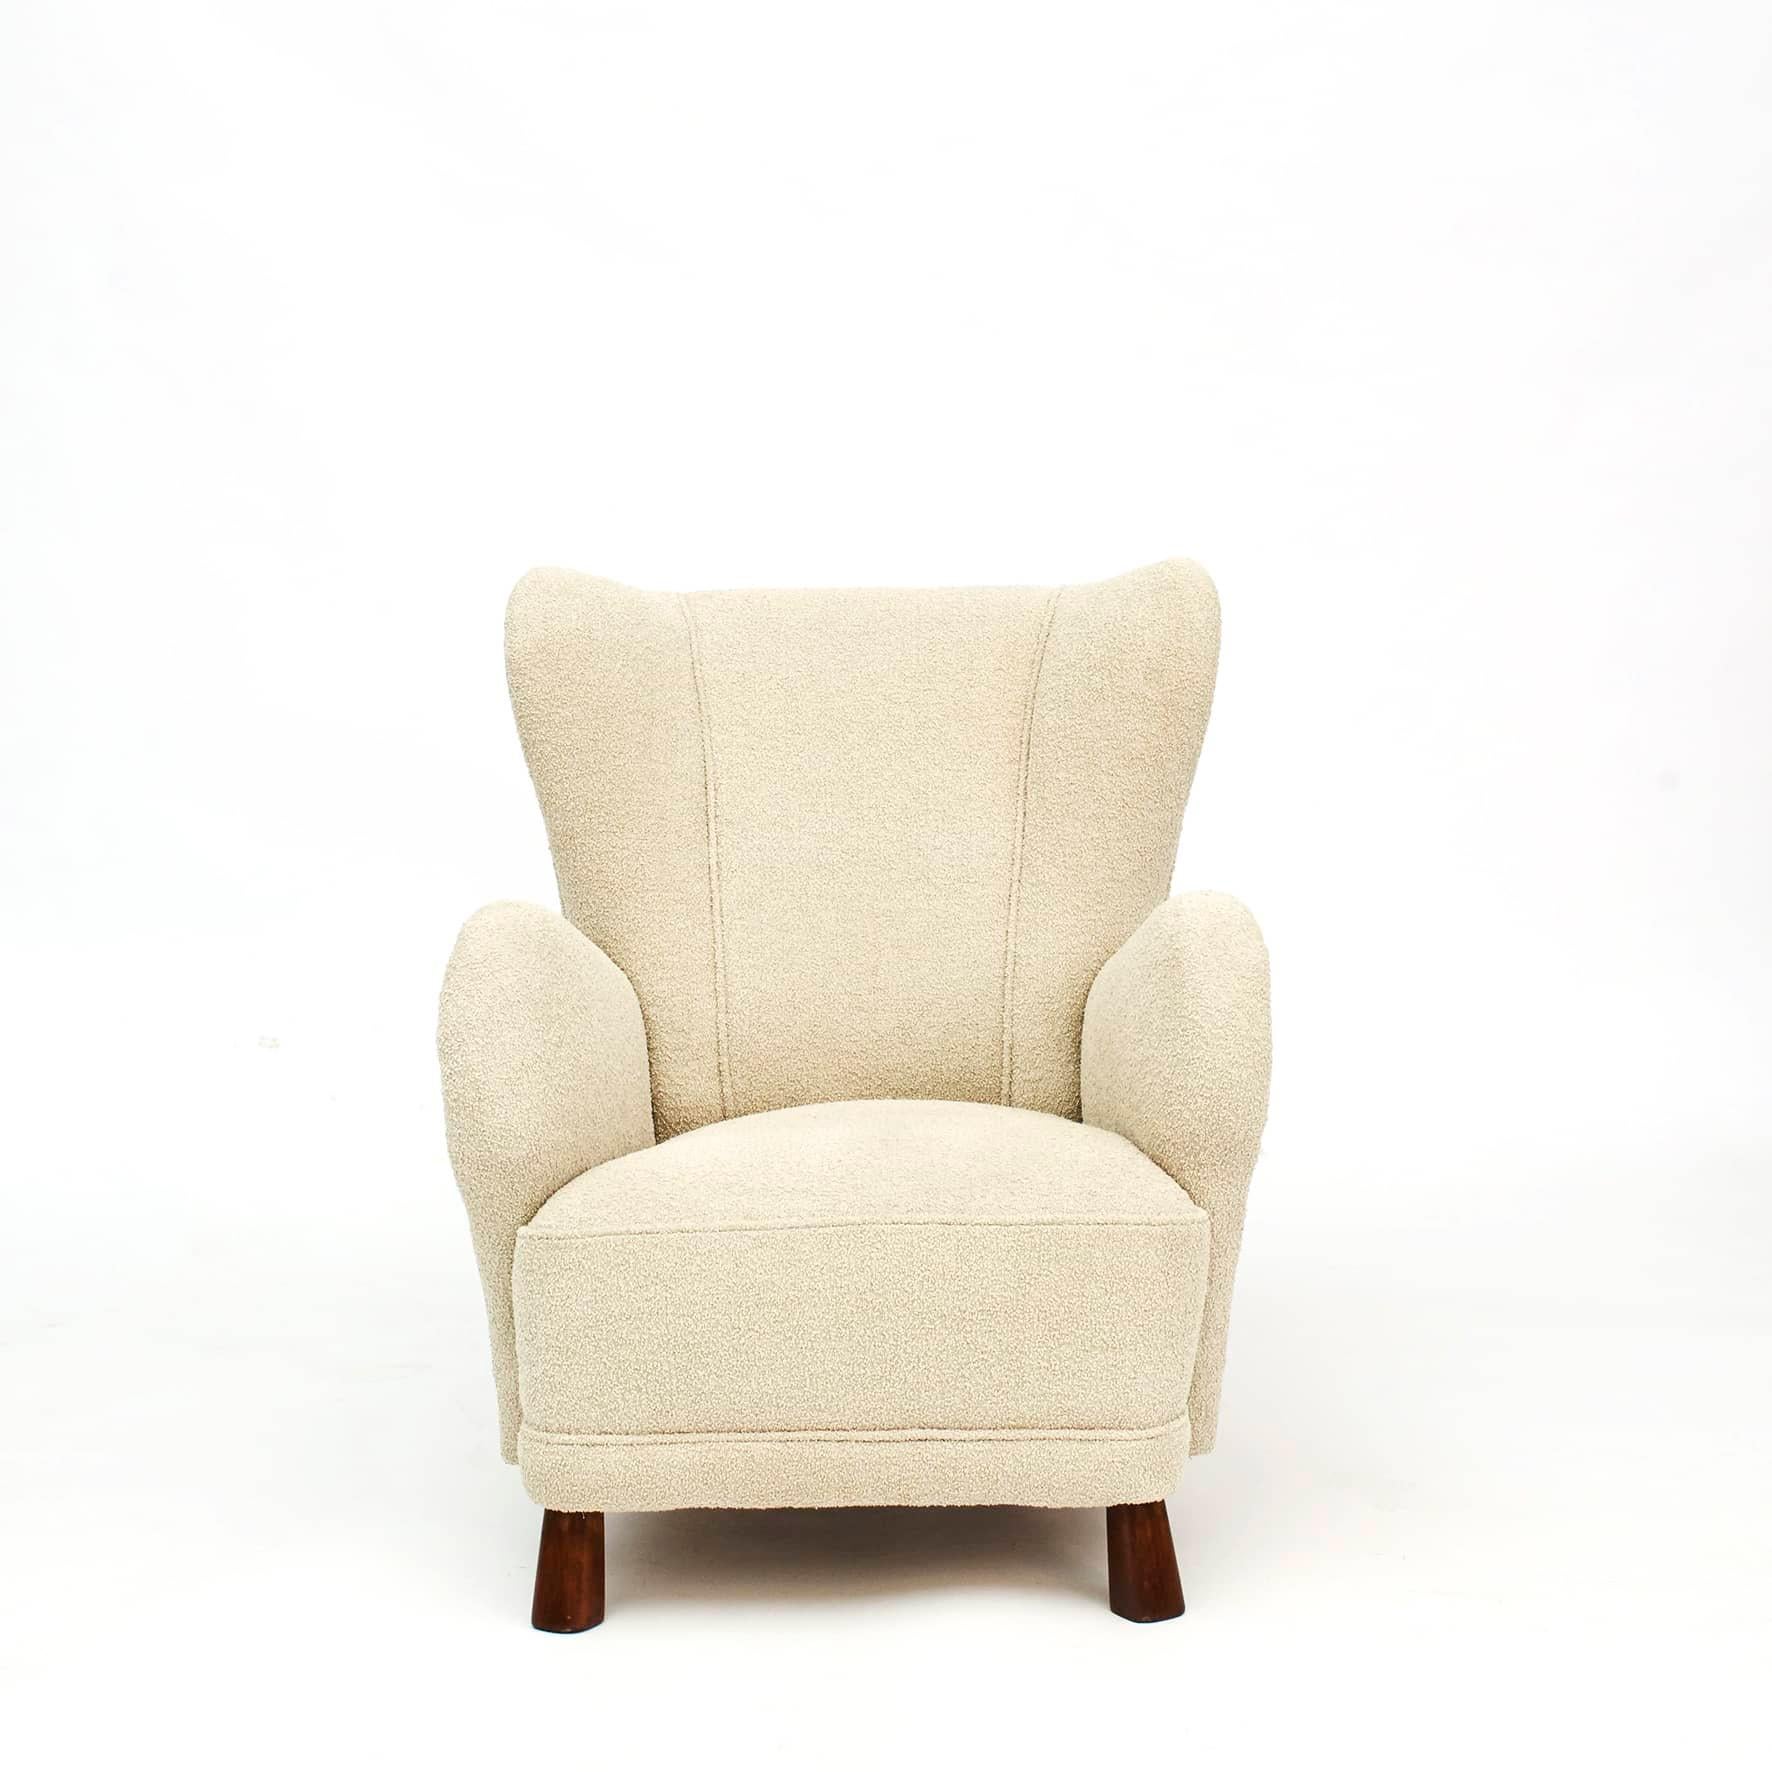 Danish easy chair, 1940-1950.
Seat with coil springs, legs in dark polished beech. Professionally reupholstered in beautiful light sand color bouclé fabric from Larsen.
Extremely comfortable lounge chair with reclining seating comfort. Excellent